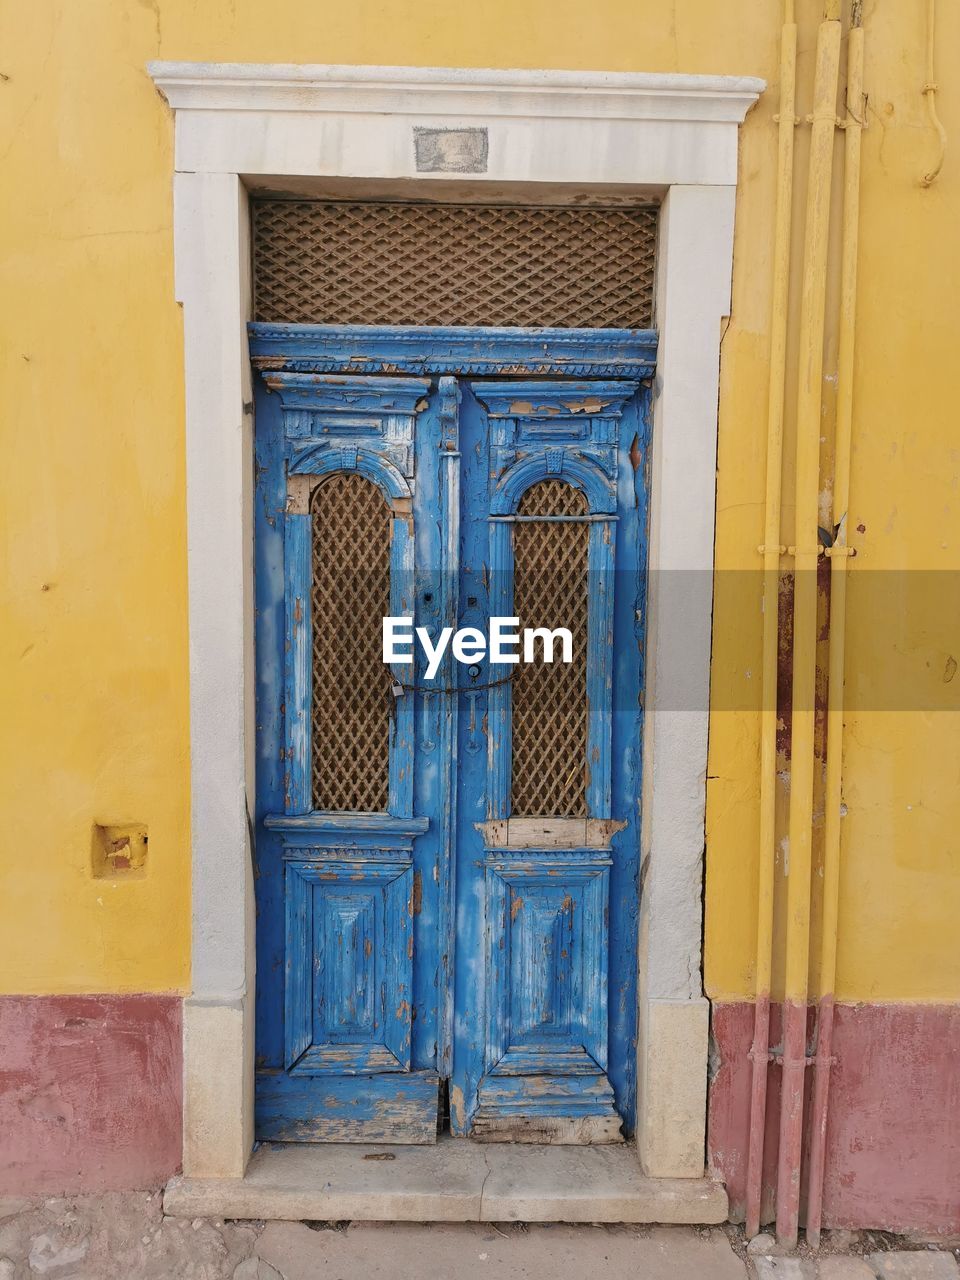 architecture, door, entrance, blue, building exterior, built structure, closed, building, wall, yellow, no people, security, protection, facade, window, house, day, residential district, old, wall - building feature, wood, outdoors, history, city, doorway, front door, iron, the past